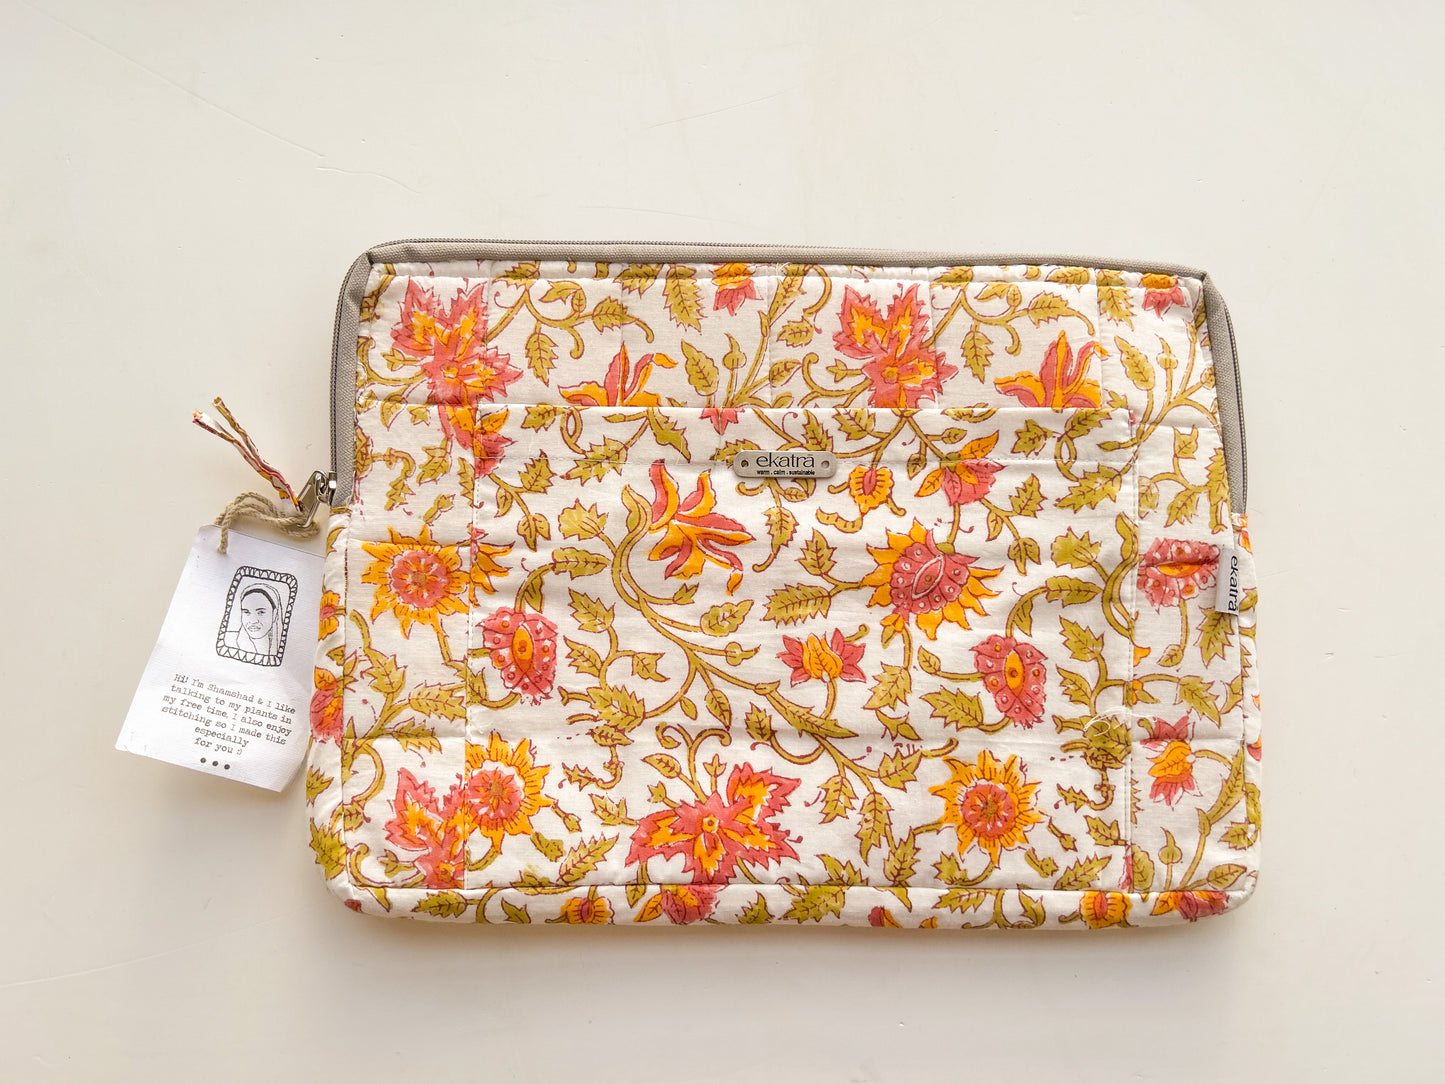 Sustainable Handmade Cotton Laptop Sleeve/Laptop Cover by Ekatra - Pink floral